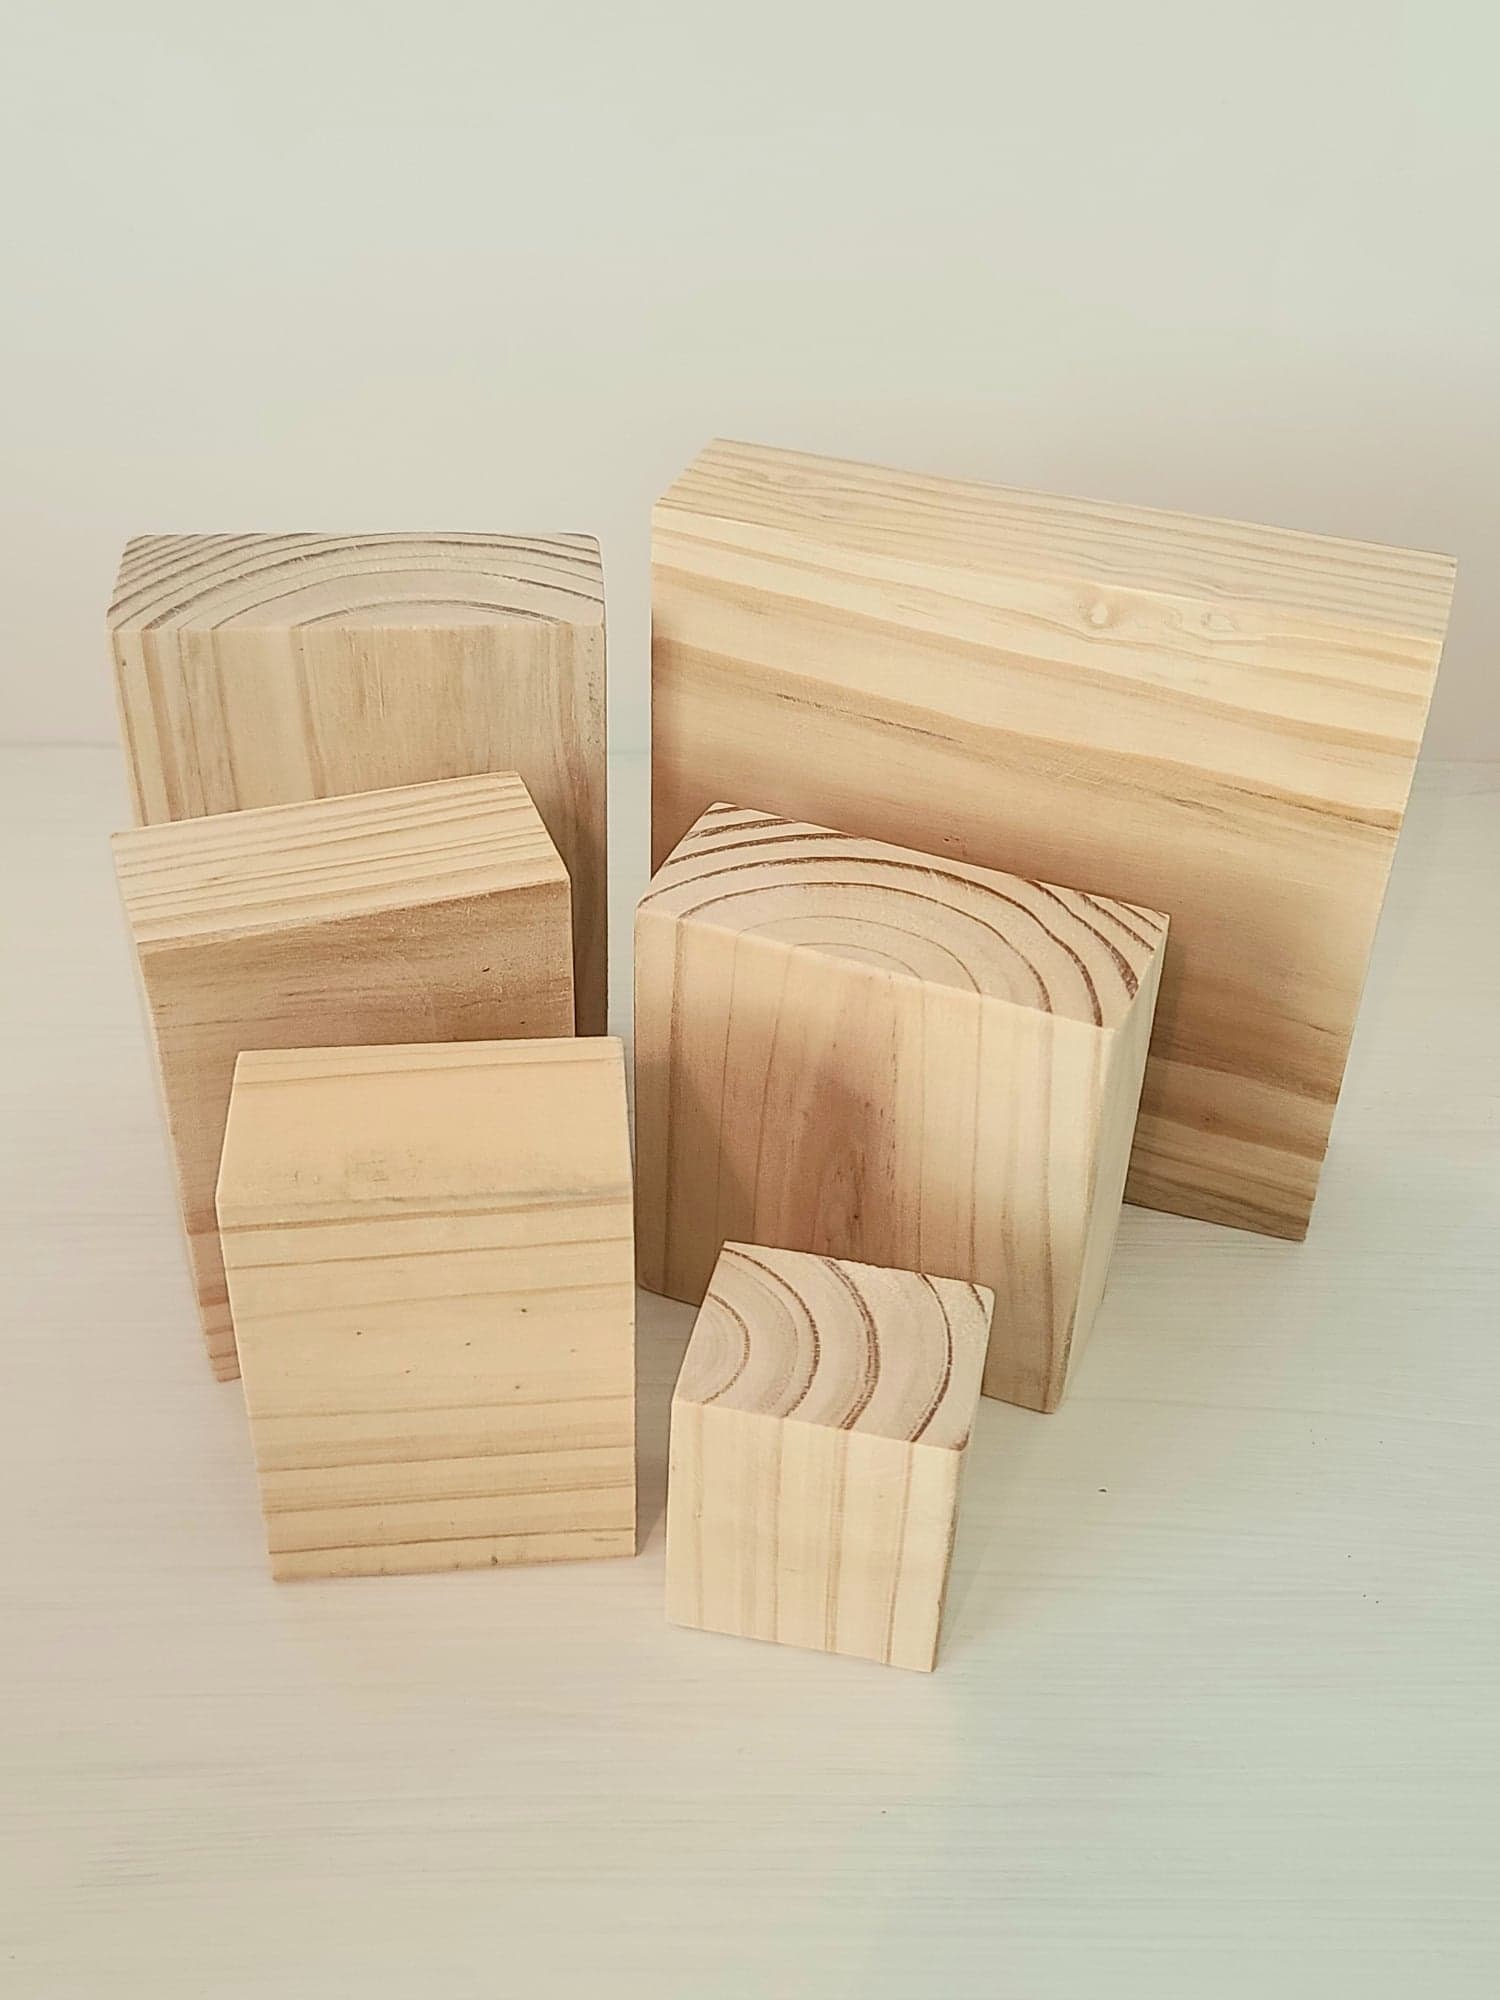 6 Unfinished Chunky Wooden Block Set Ready to Paint for Wood Crafts 